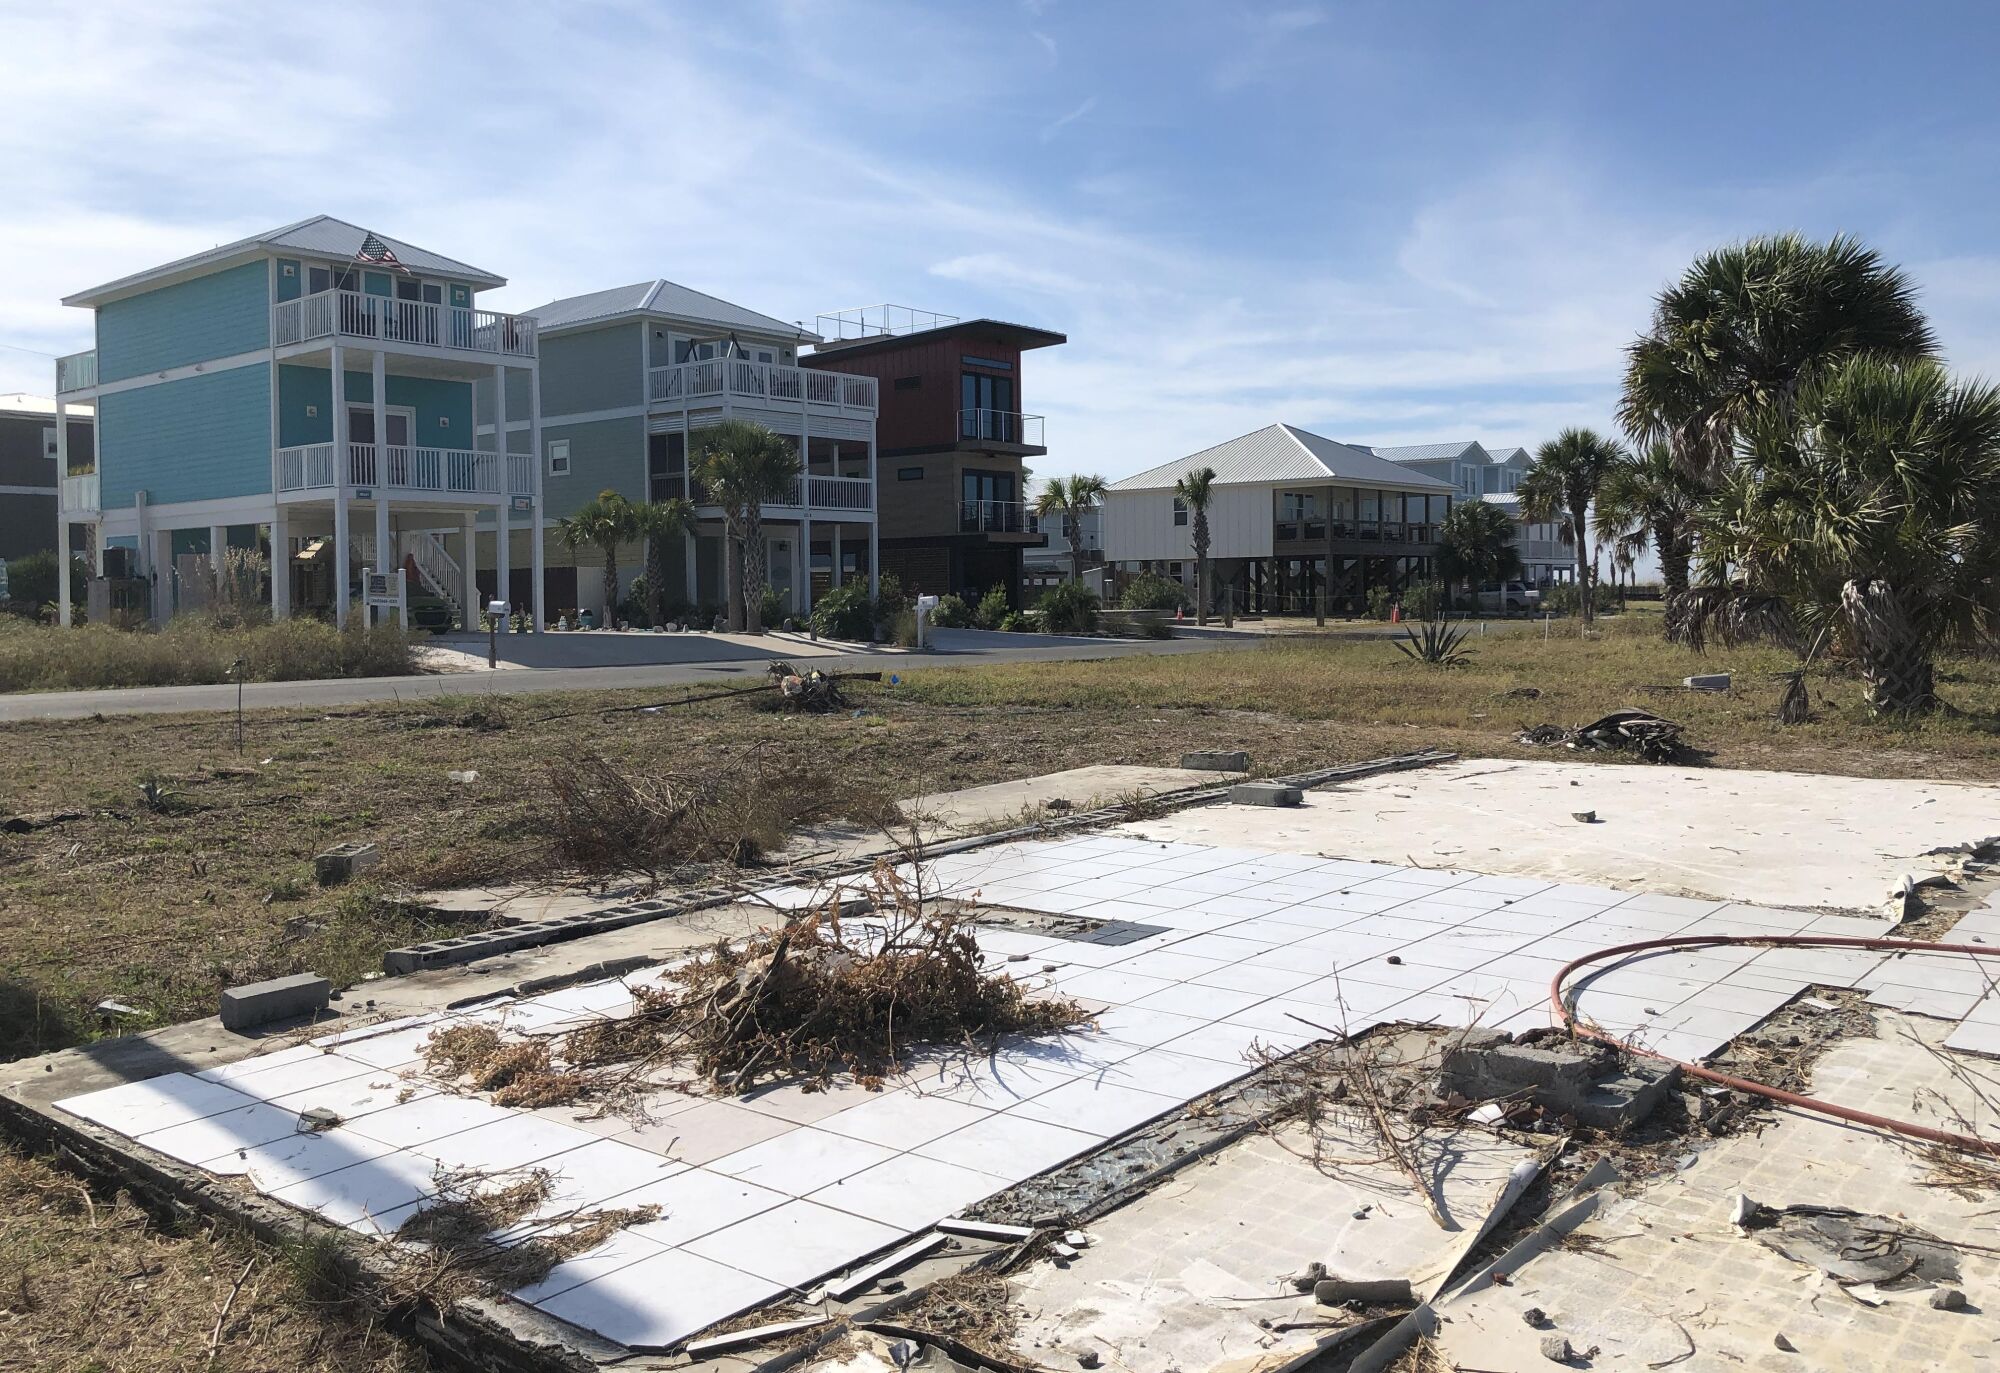 New homes perched on concrete and rebar columns are part of the rebuild of Mexico Beach.